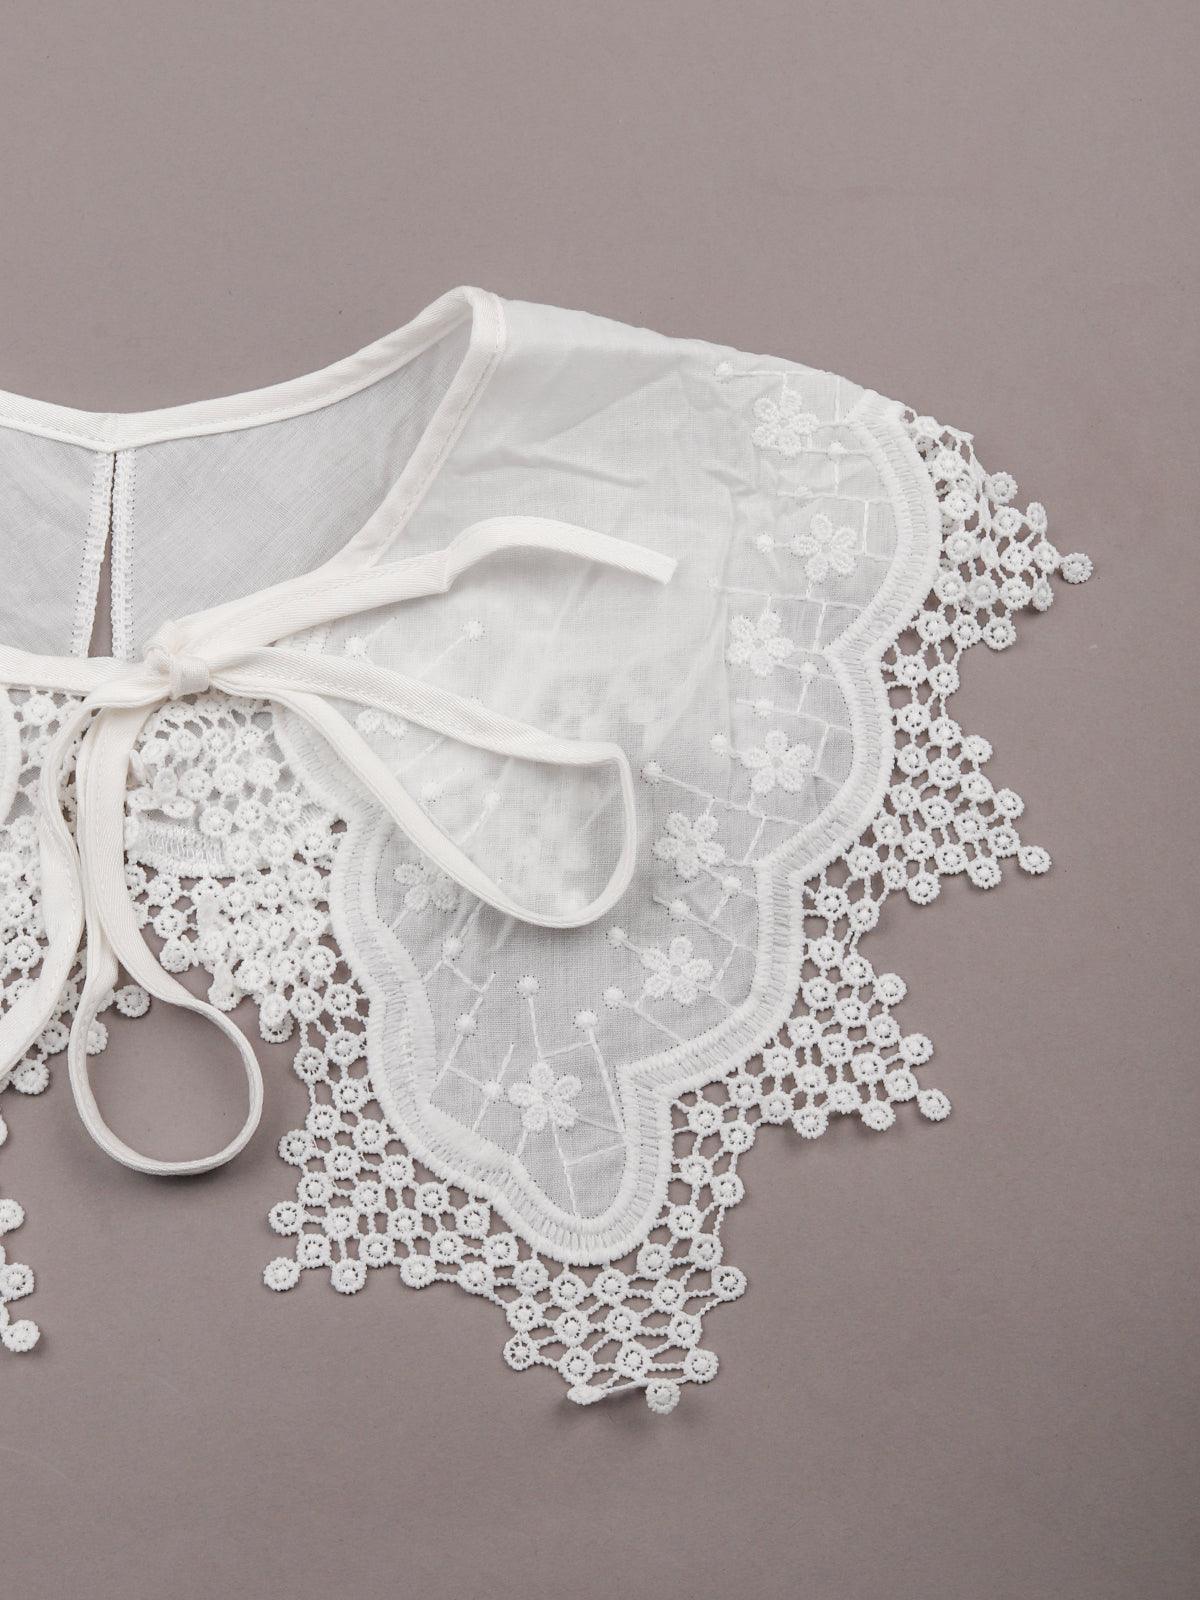 Gorgeous white laced collar - Odette